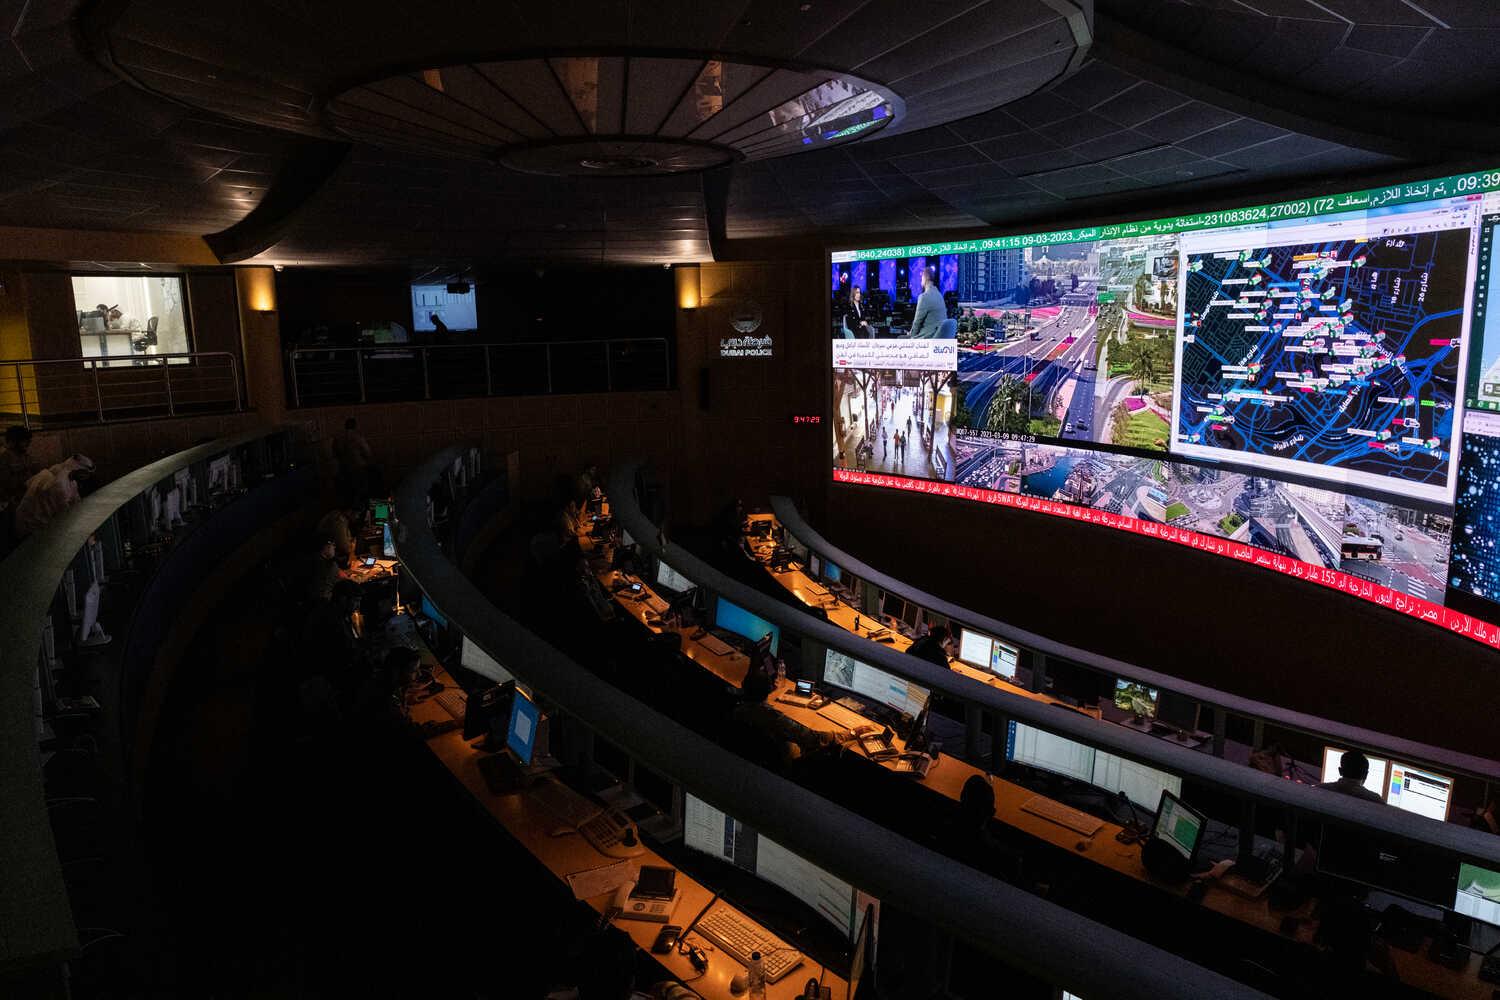 On a giant screen, police officers can view live feeds from cameras and the locations of all emergency vehicles.